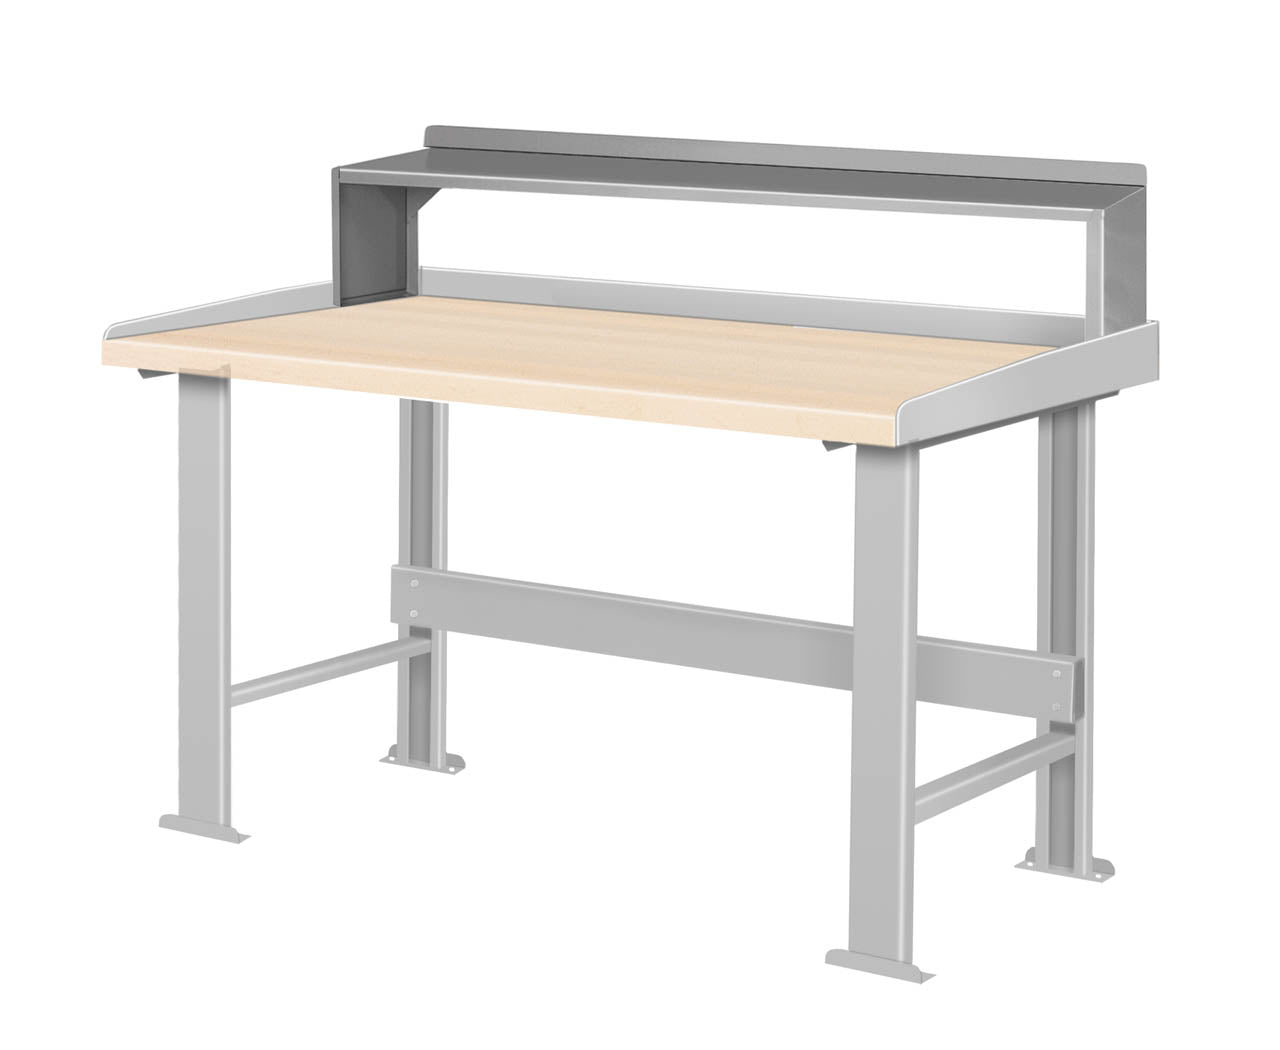 60"W Bench Riser for Pucel Work Benches